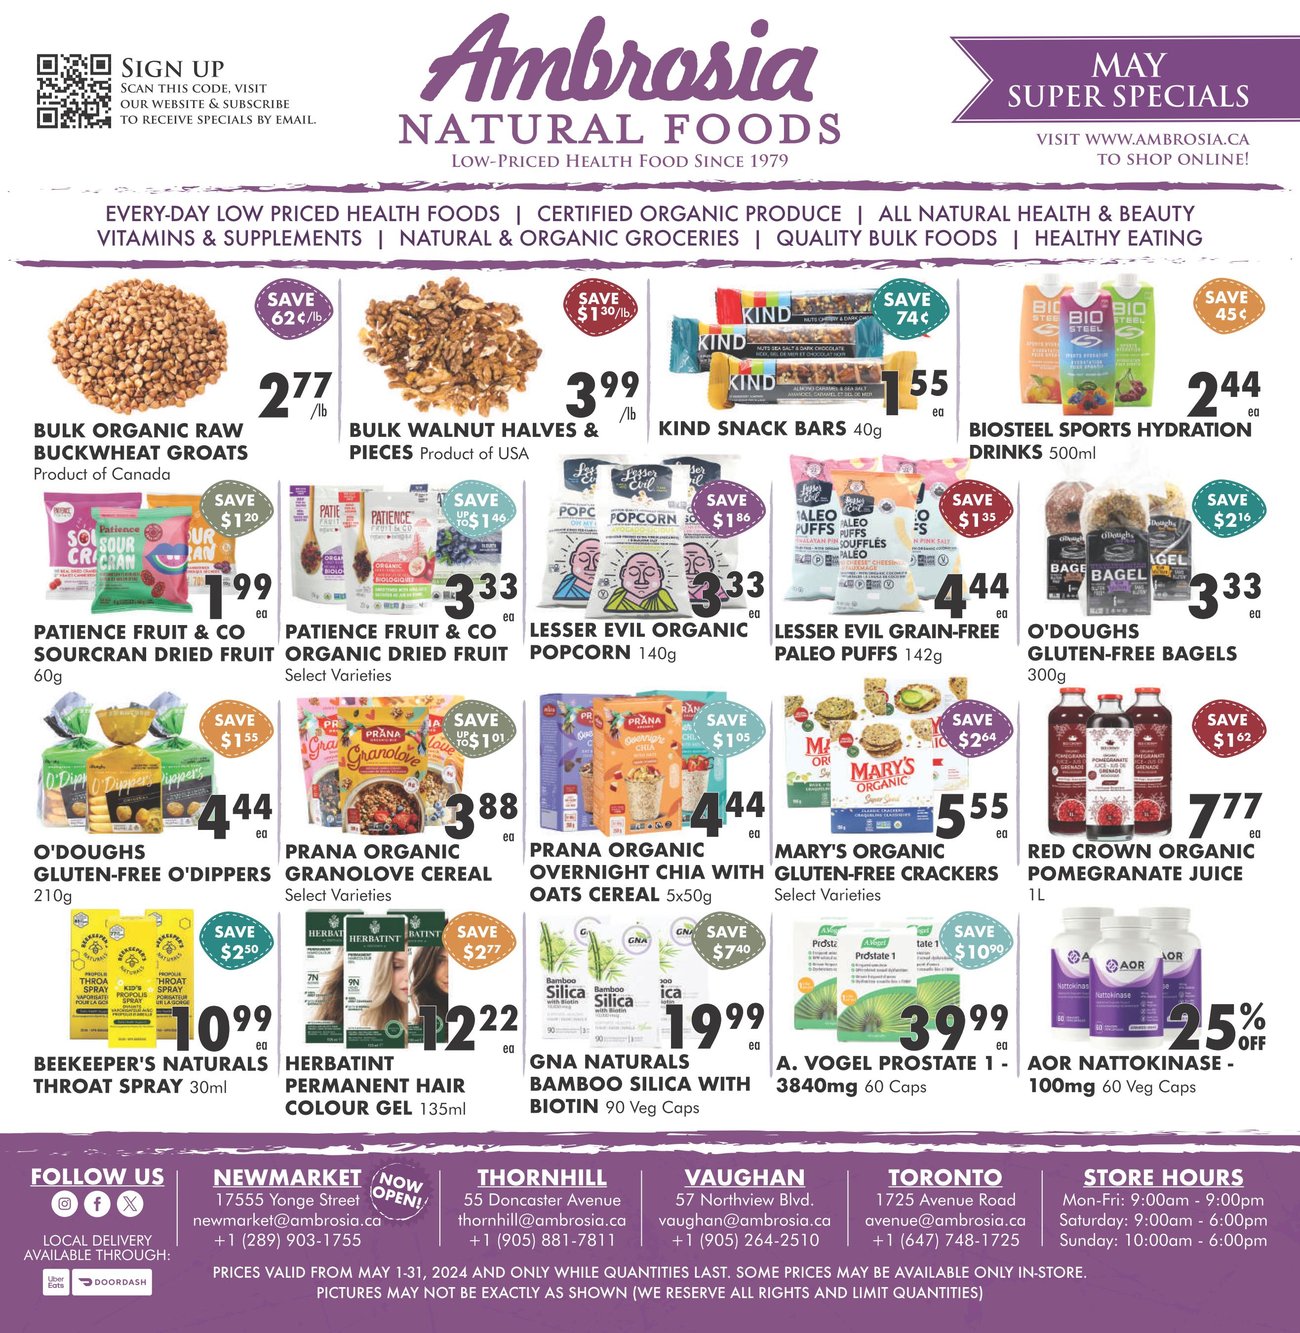 Ambrosia Natural Foods - Monthly Specials - Page 1